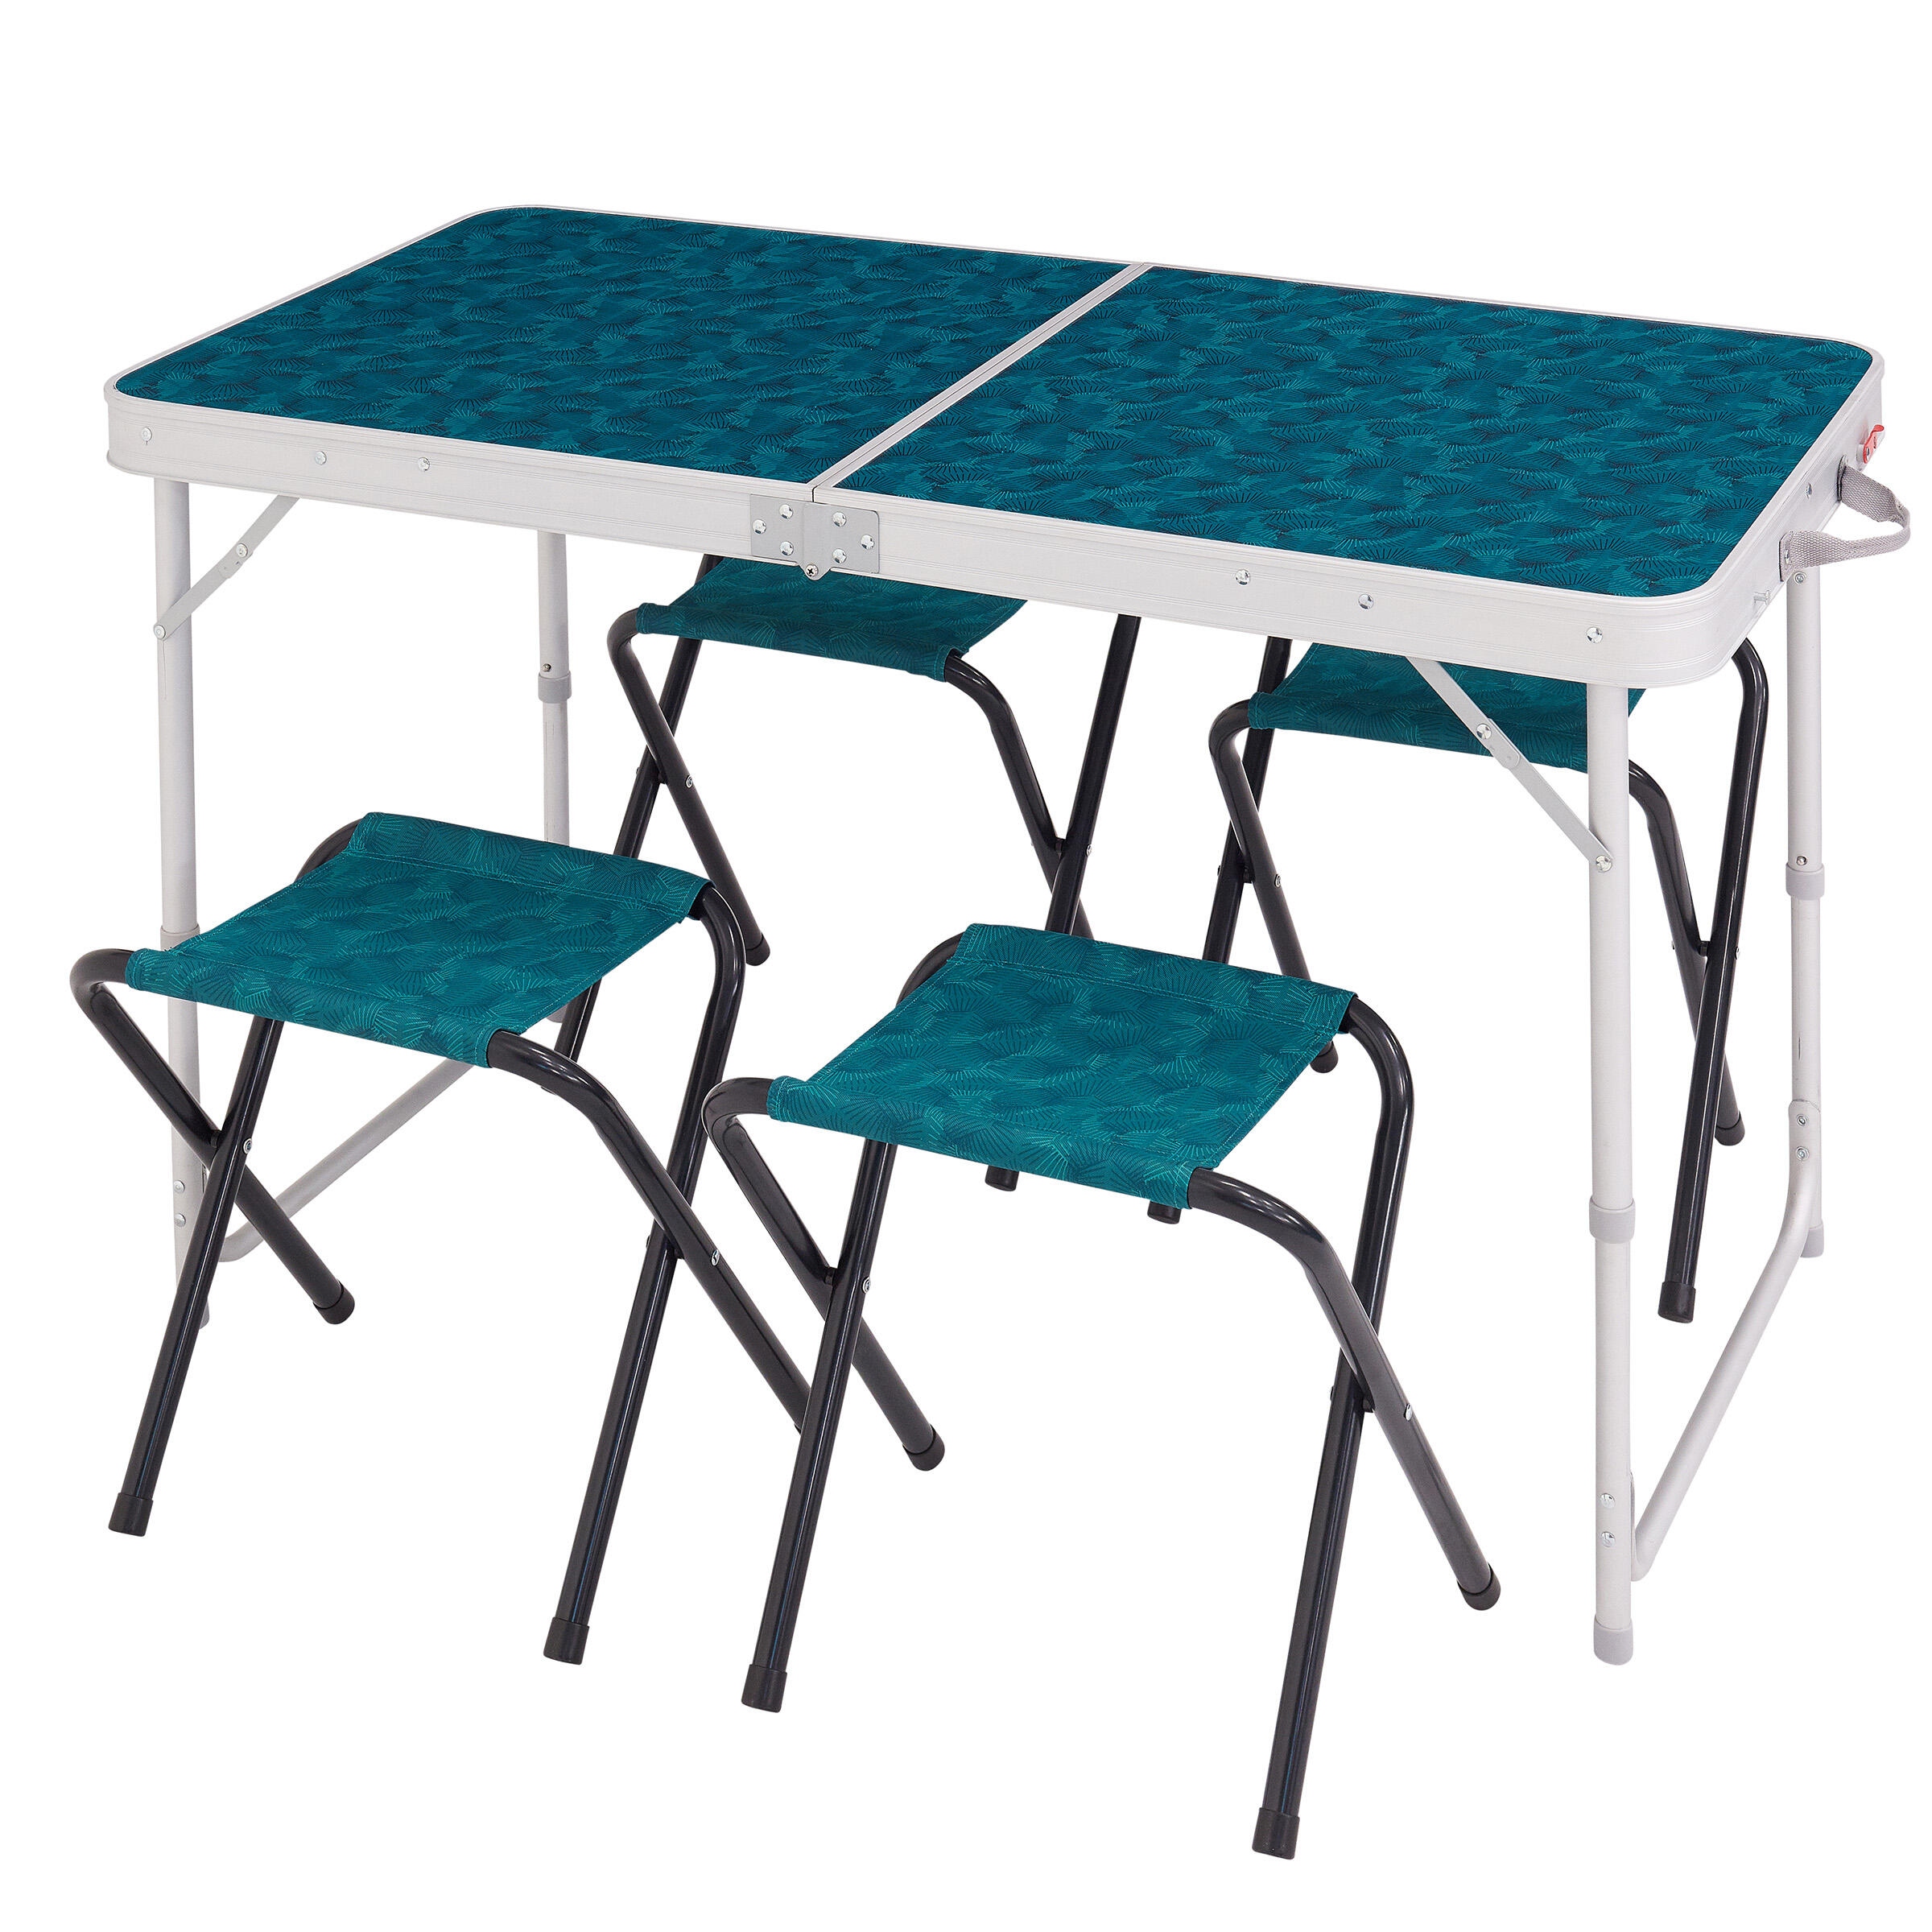 QUECHUA FOLDING CAMPING TABLE WITH 4 STOOLS